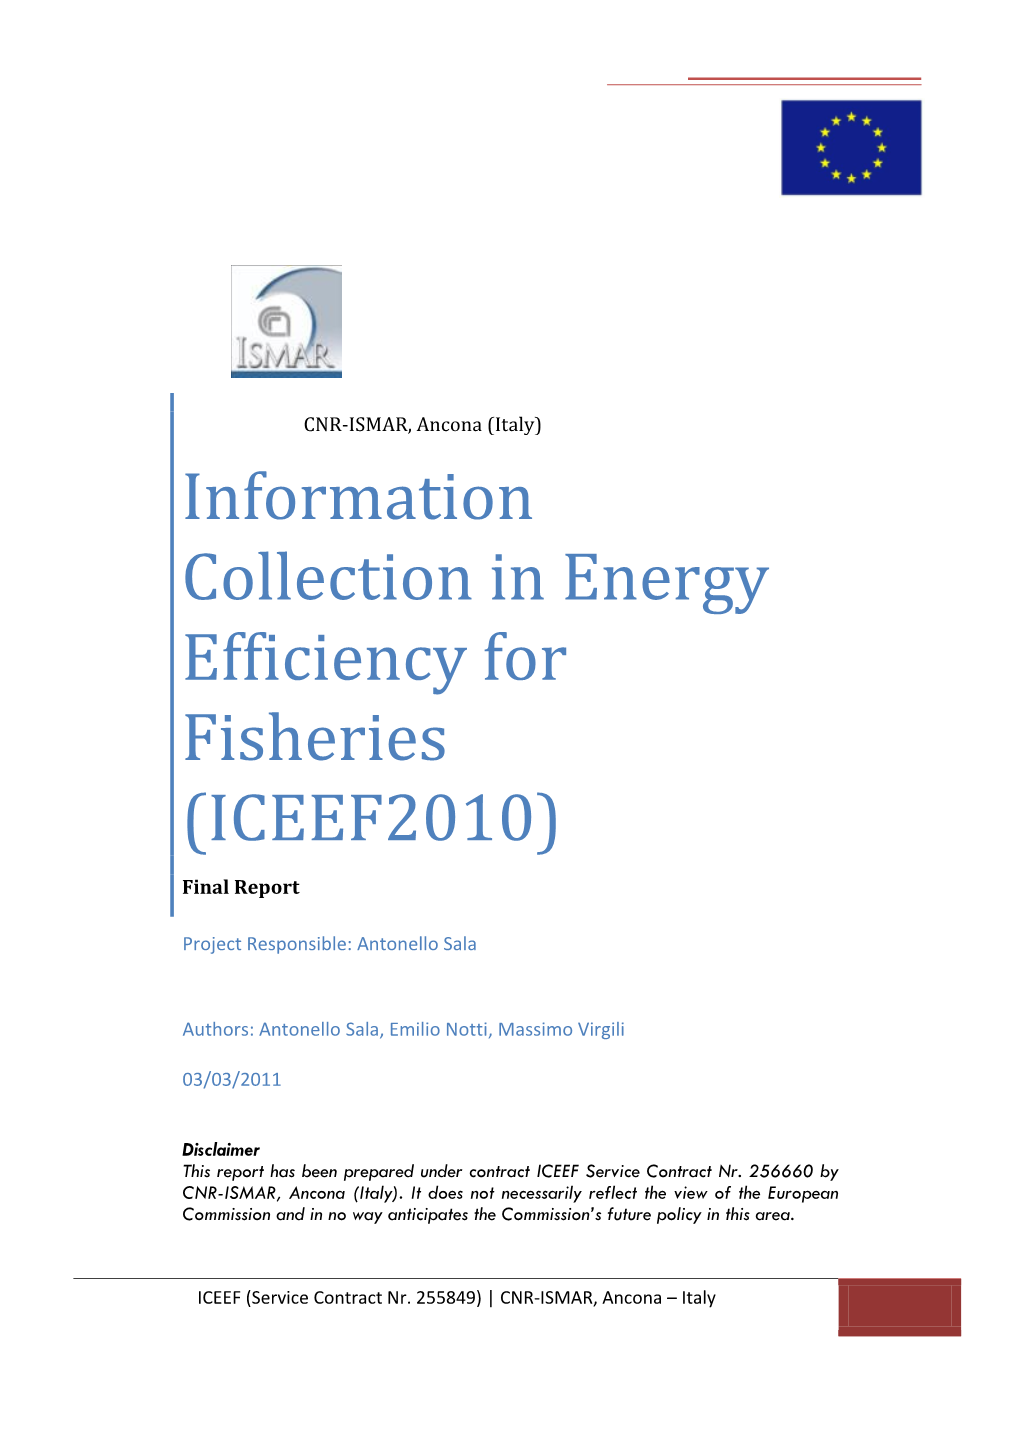 Information Collection in Energy Efficiency for Fisheries (ICEEF2010)